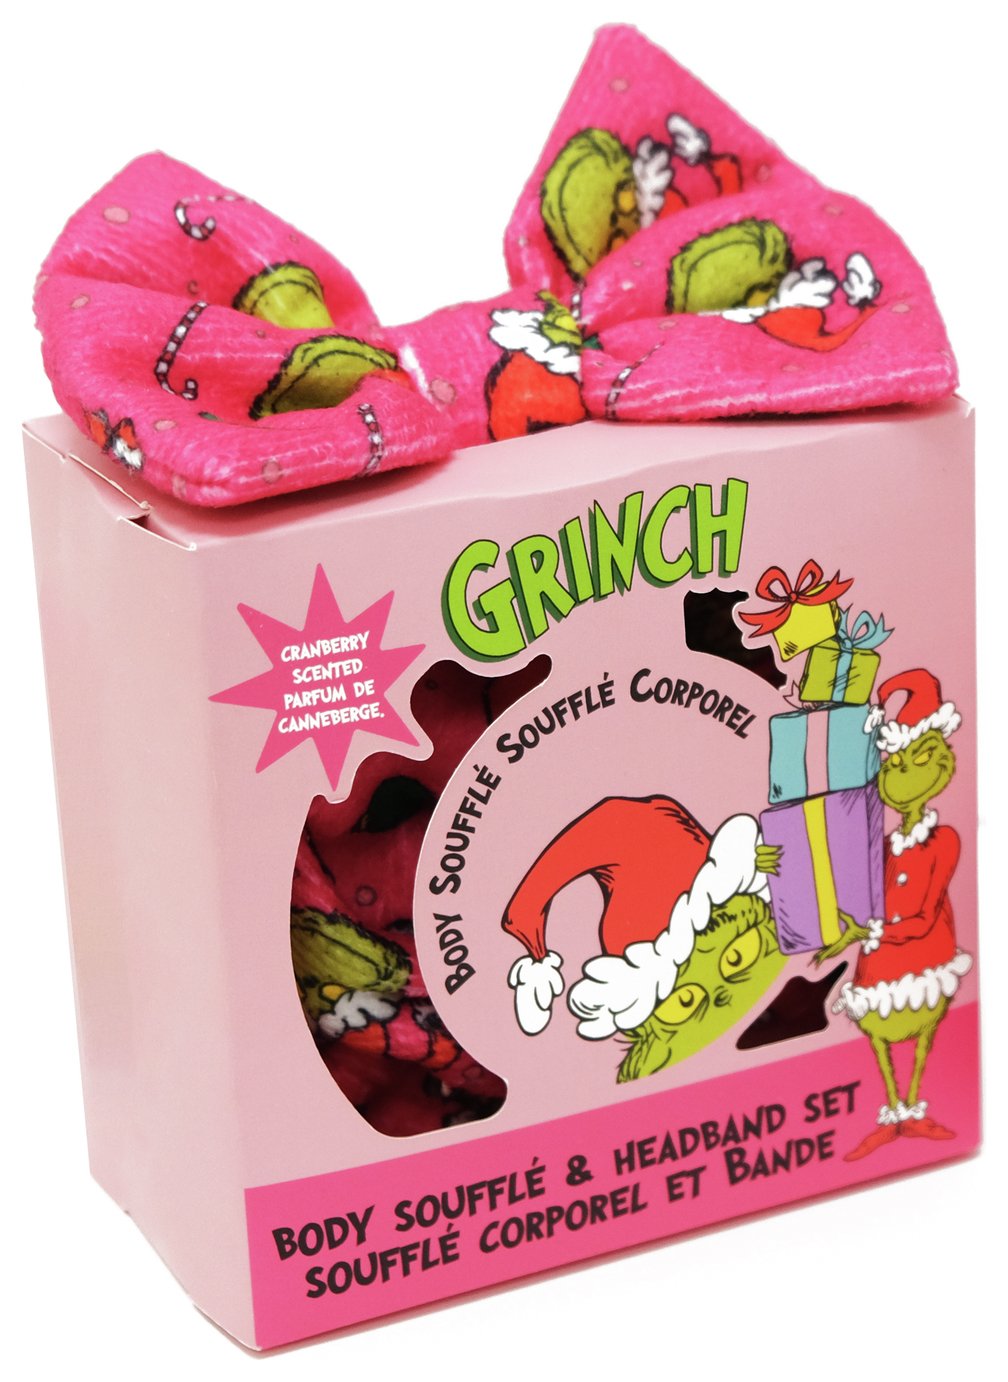 The Grinch Souffle and Headband Set